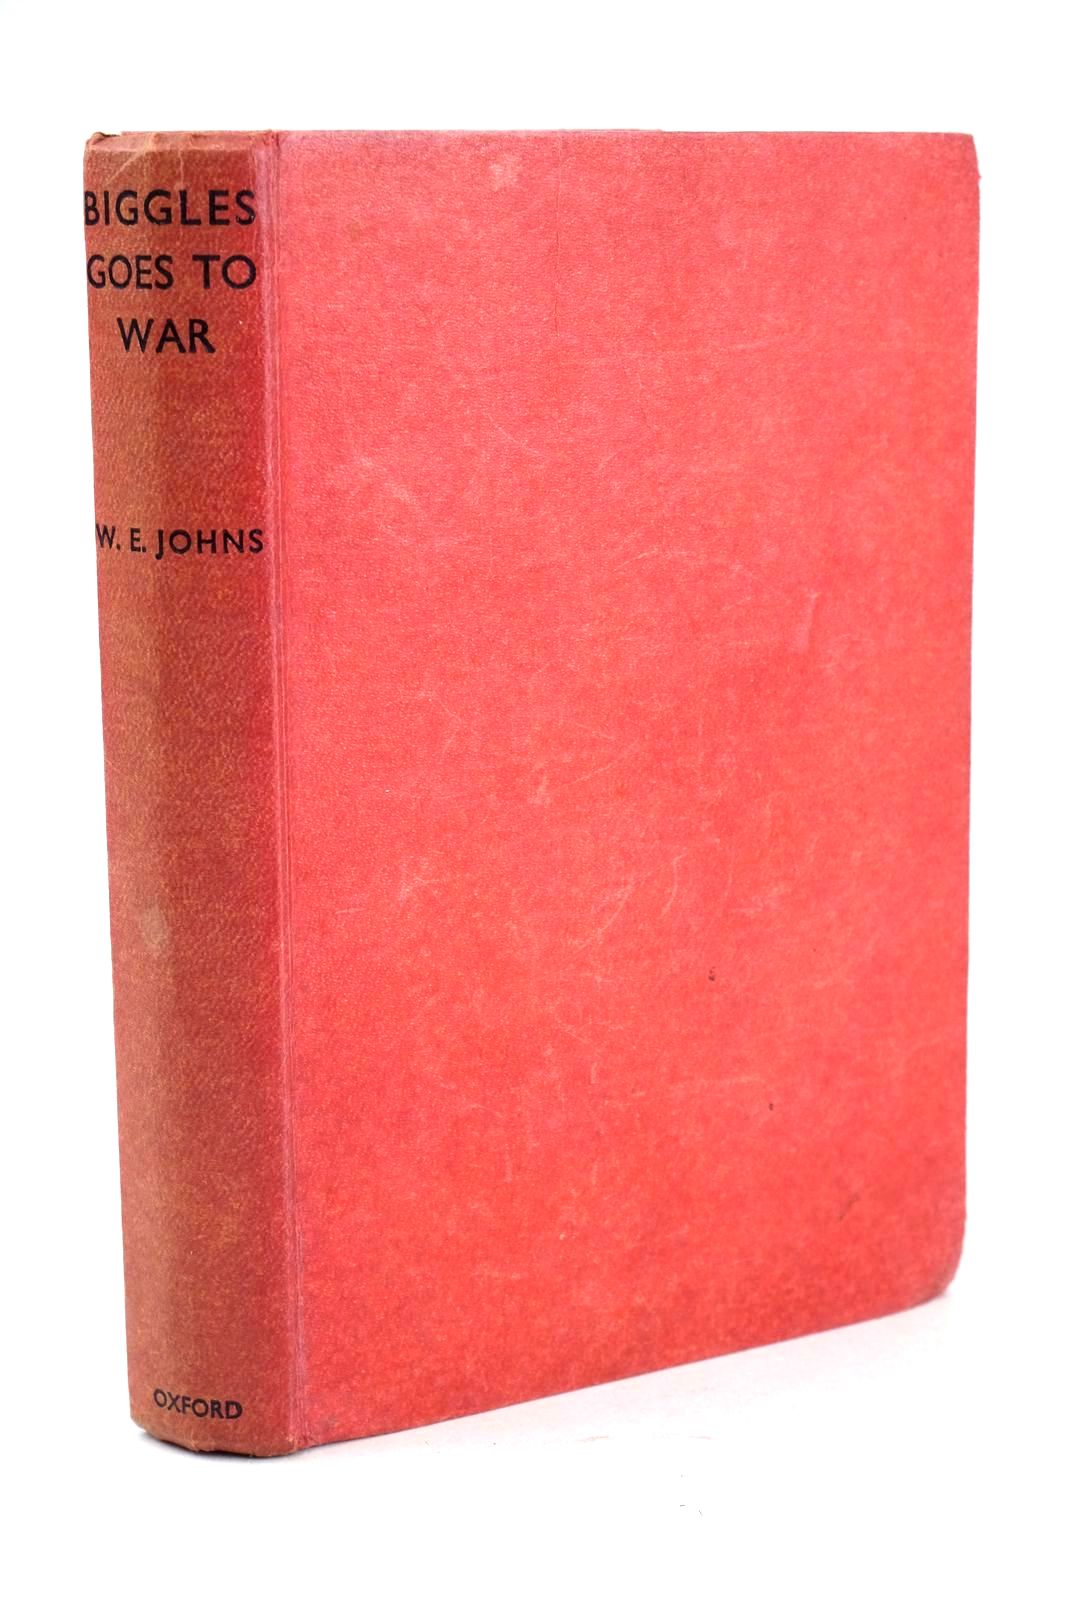 Photo of BIGGLES GOES TO WAR written by Johns, W.E. illustrated by Tyas, Martin published by Oxford University Press, Geoffrey Cumberlege (STOCK CODE: 1326232)  for sale by Stella & Rose's Books